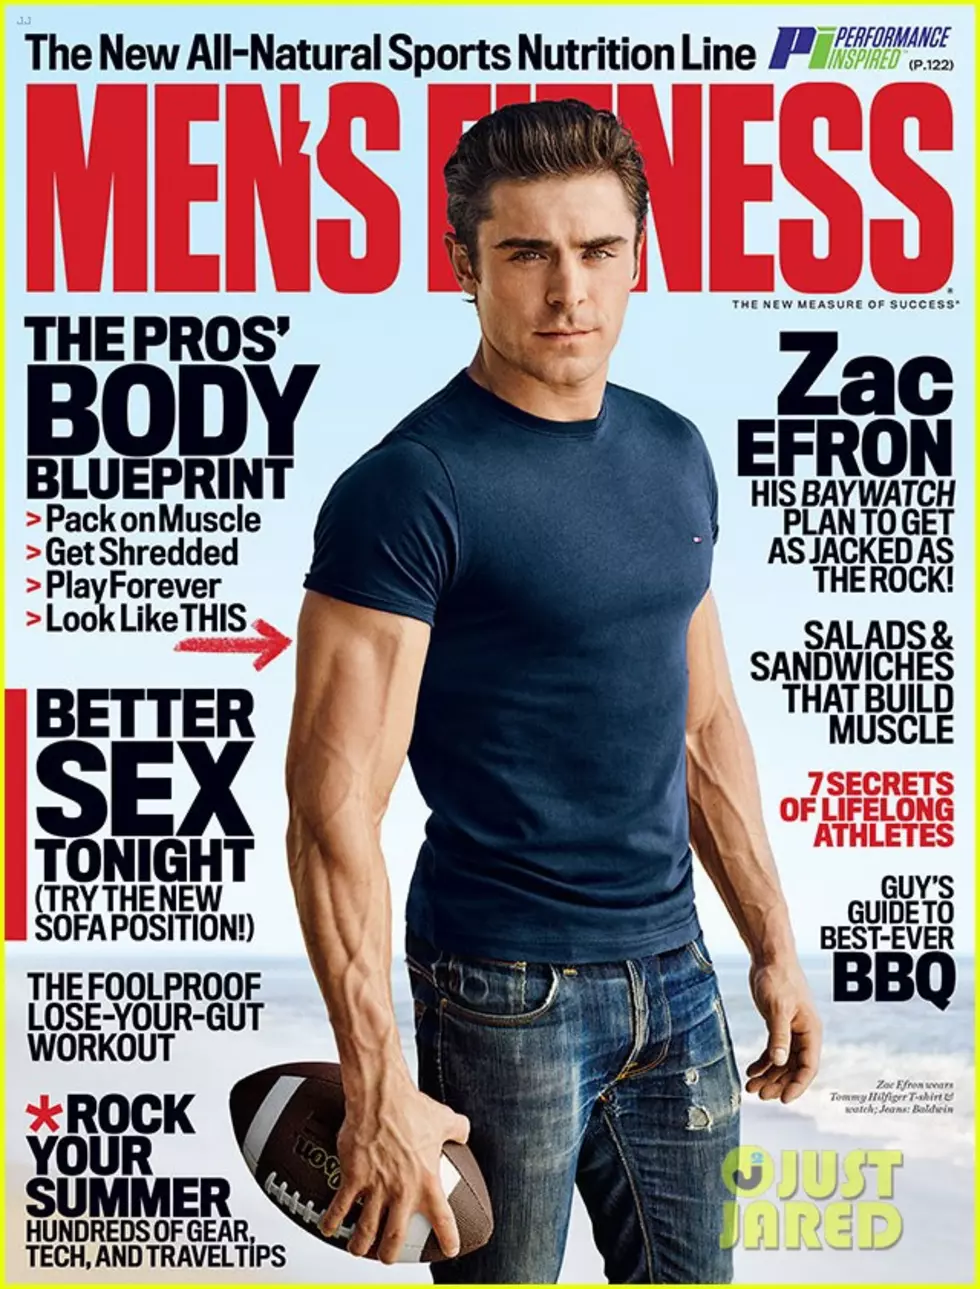 Zac Efron Admits He Wants to Kick His Own Ass Sometimes